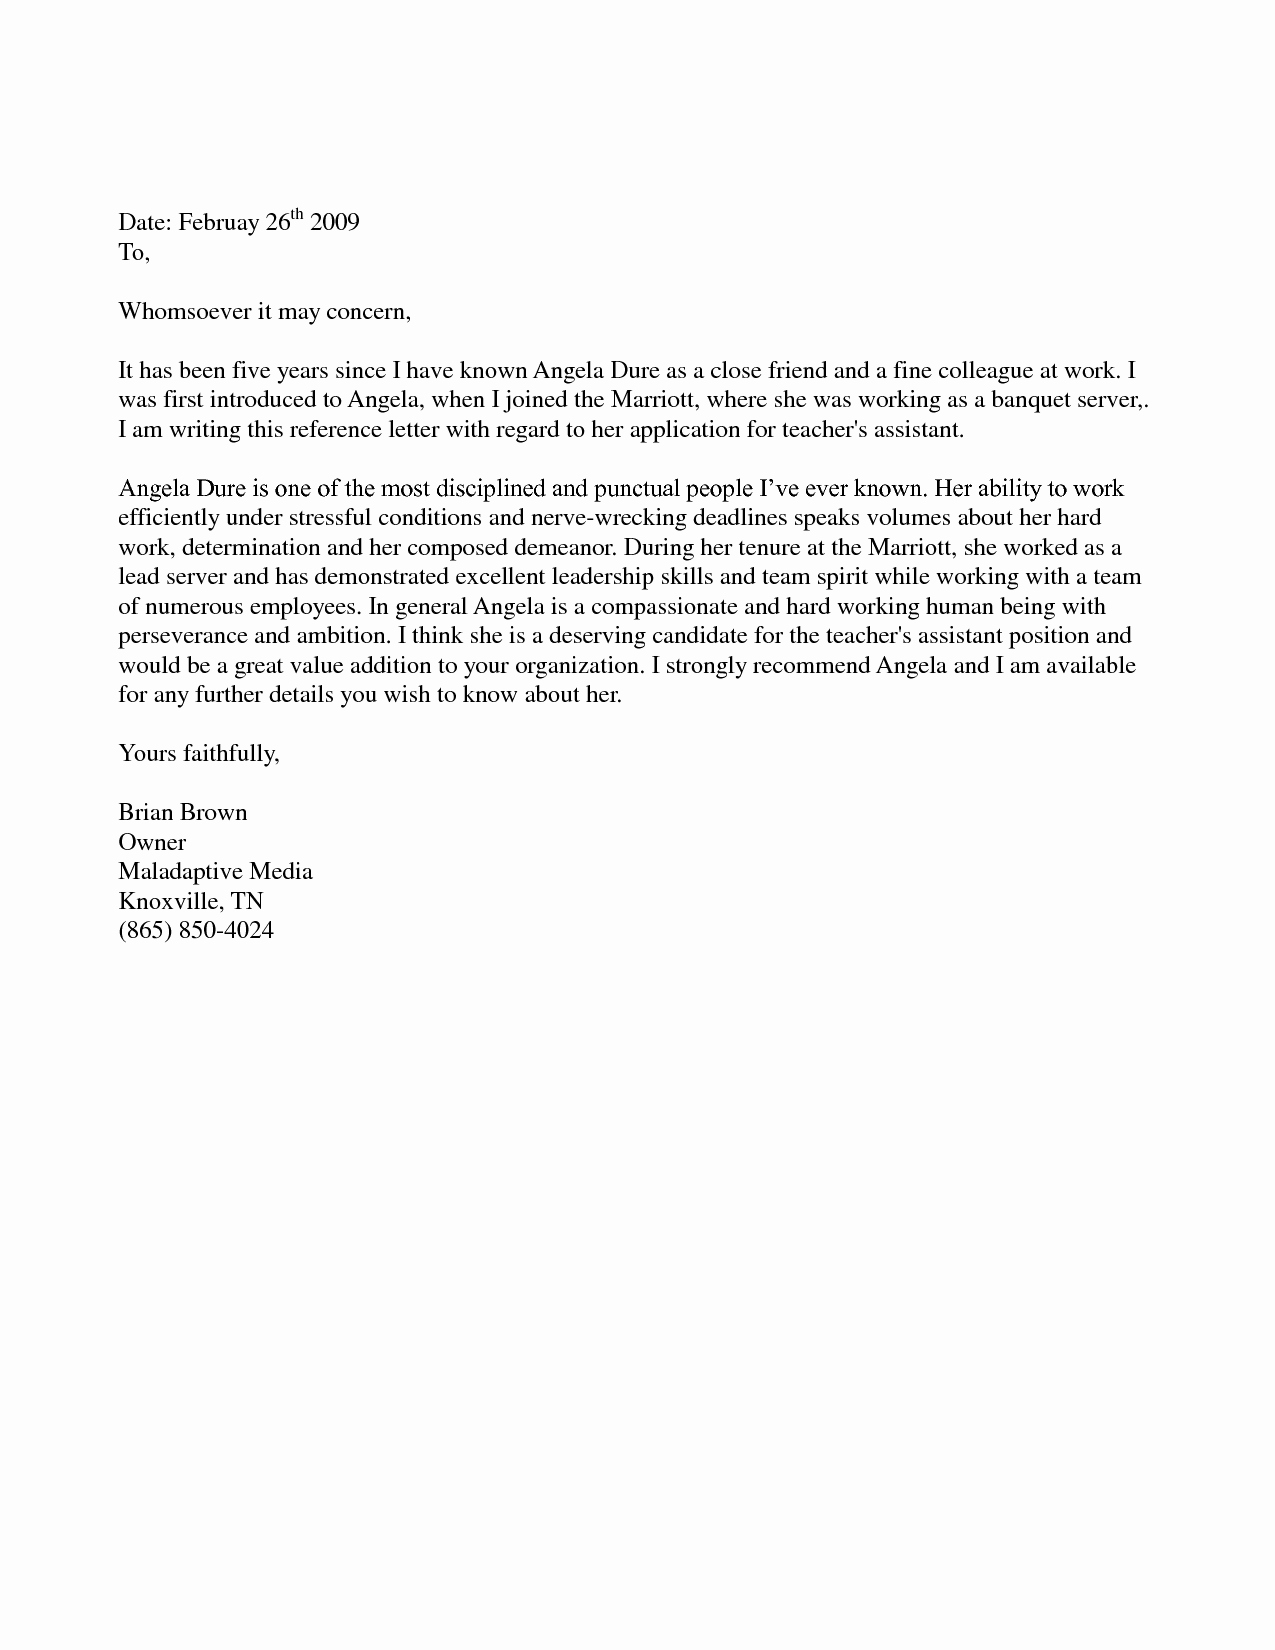 Format Of A Recomendation Letter Inspirational Sample Letter Re Mendation for A Friend